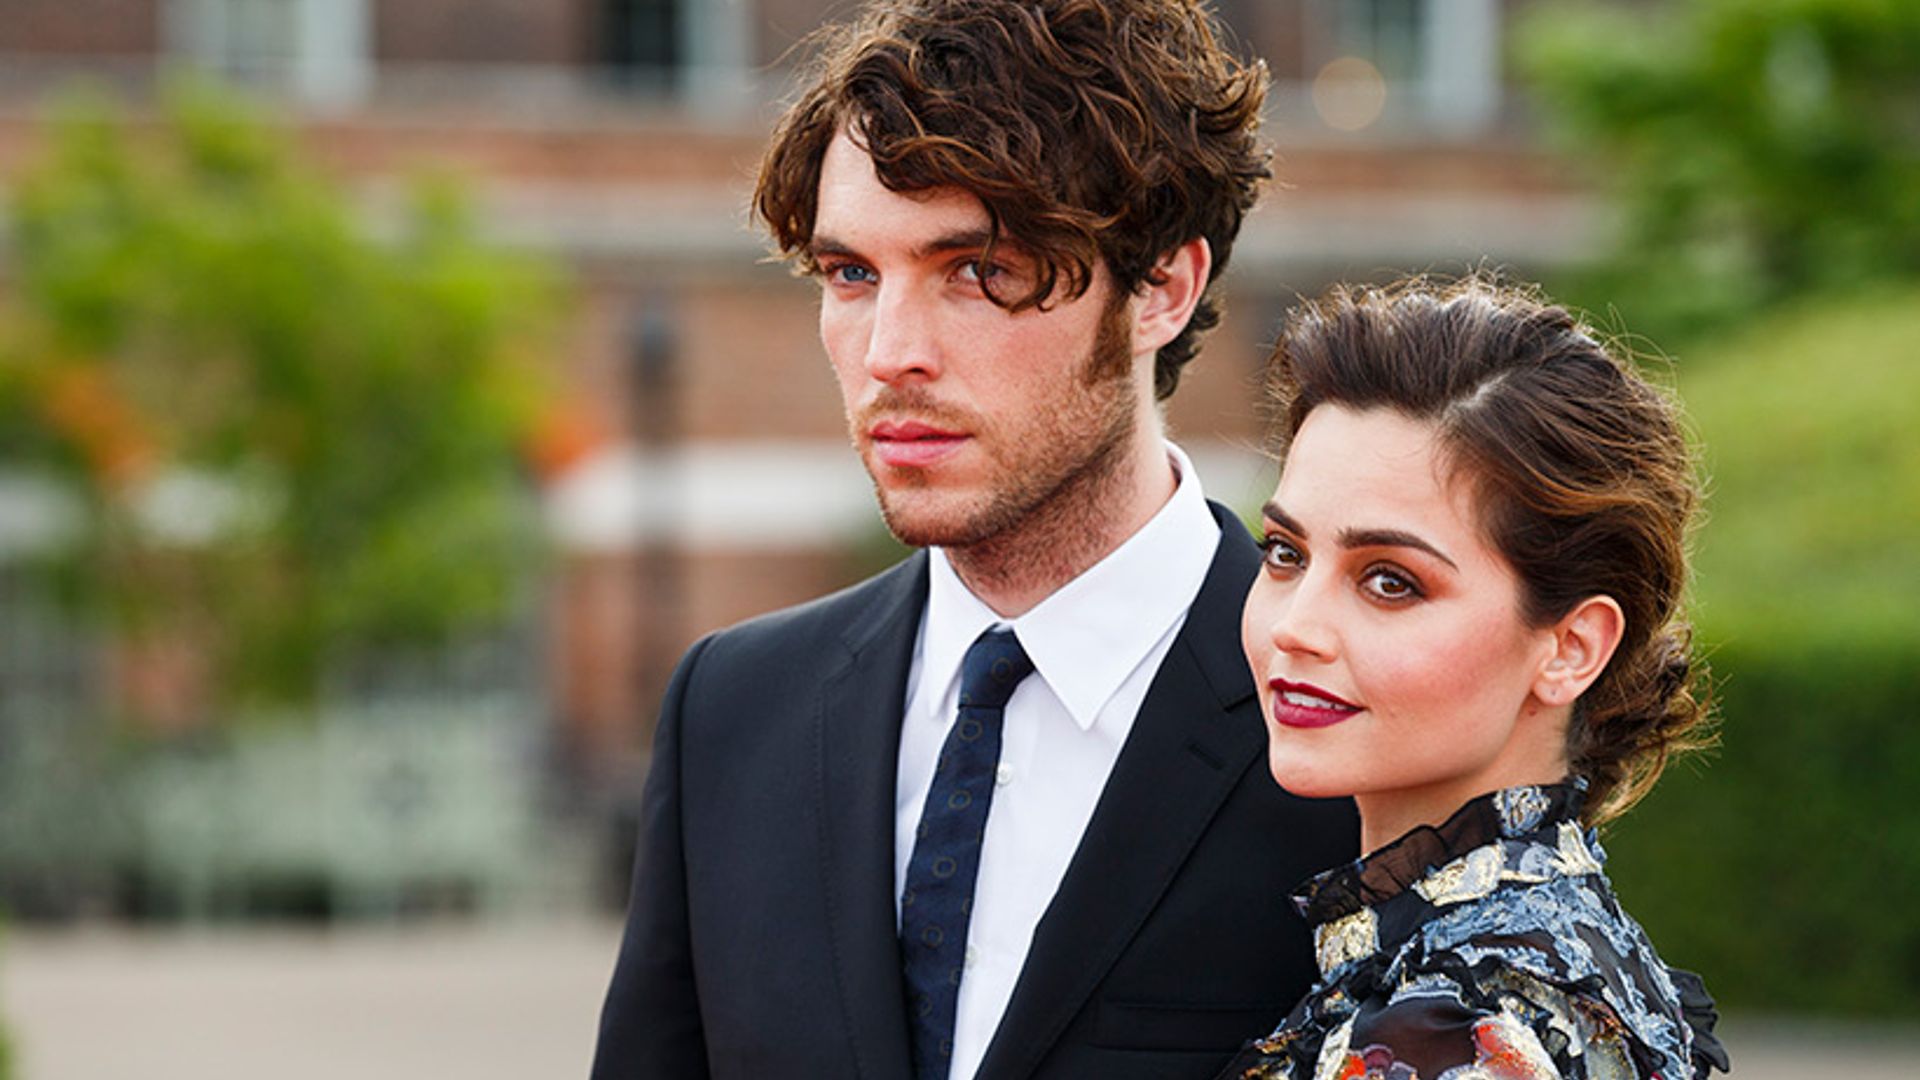 Are Victoria stars Jenna Coleman and Tom Hughes dating?